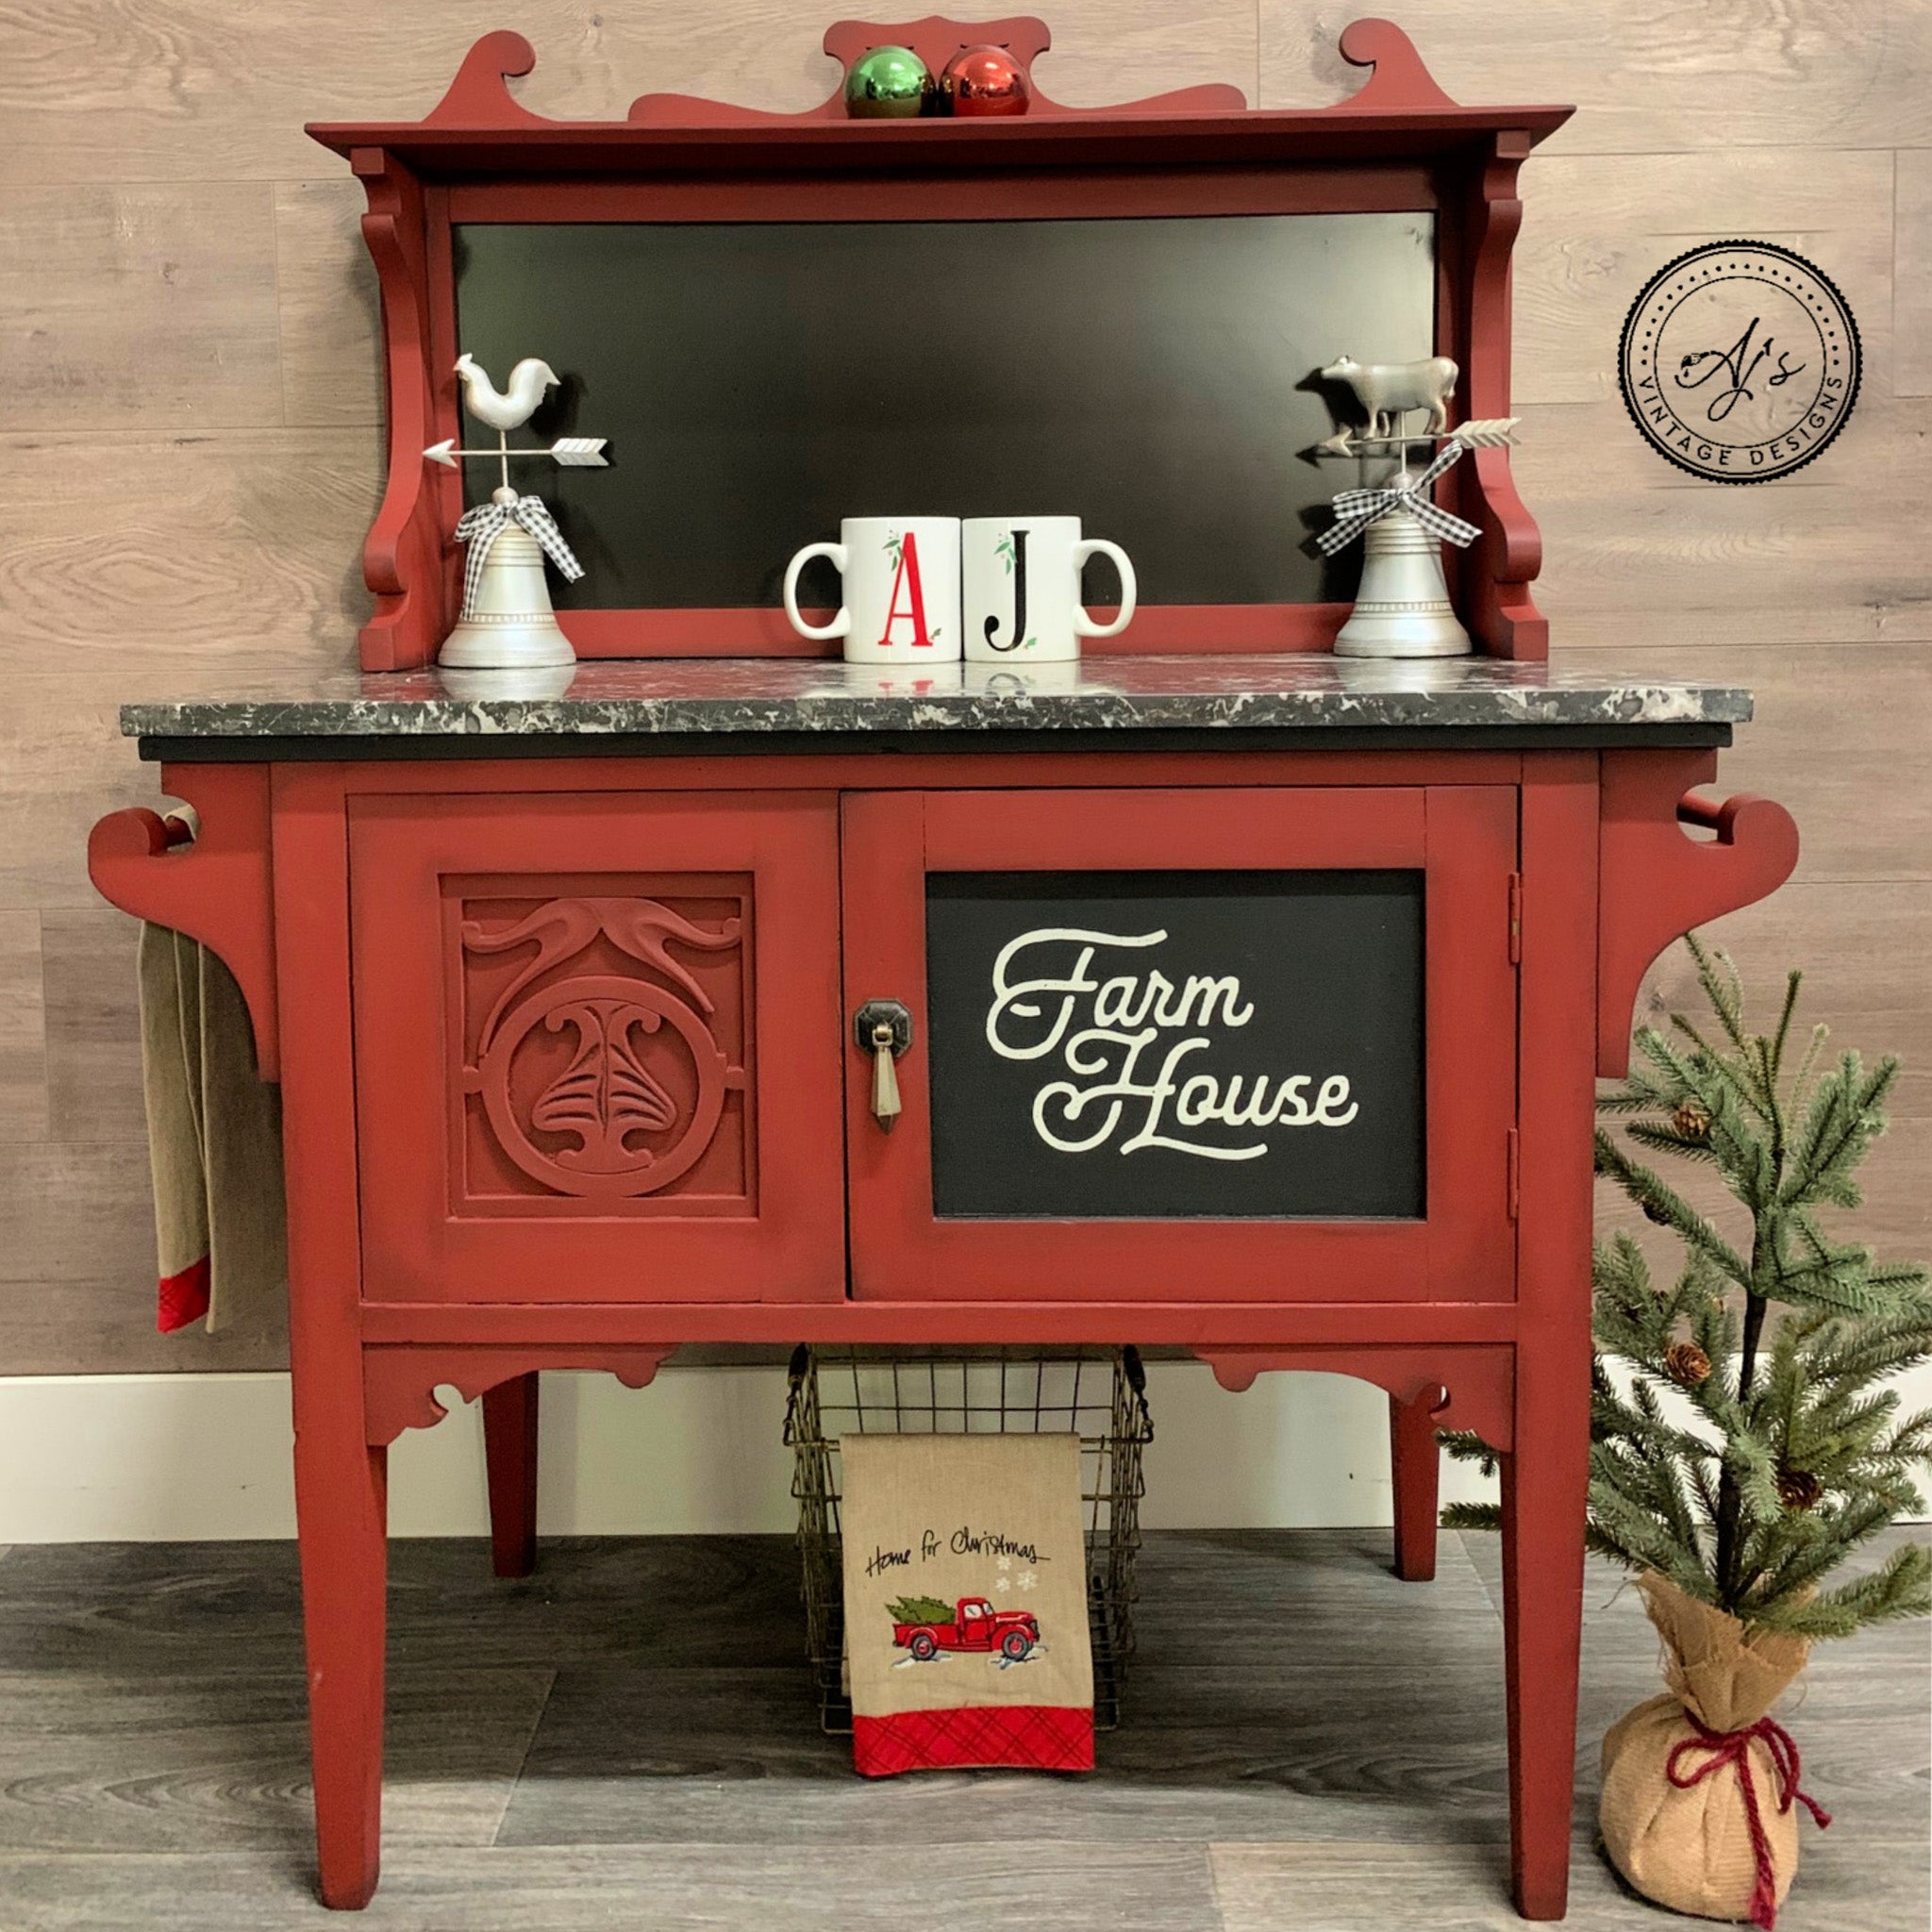 A vintage bar cart refurbished by Aj's Vintage Designs is painted in Dixie Belle's Rustic Red chalk mineral paint.